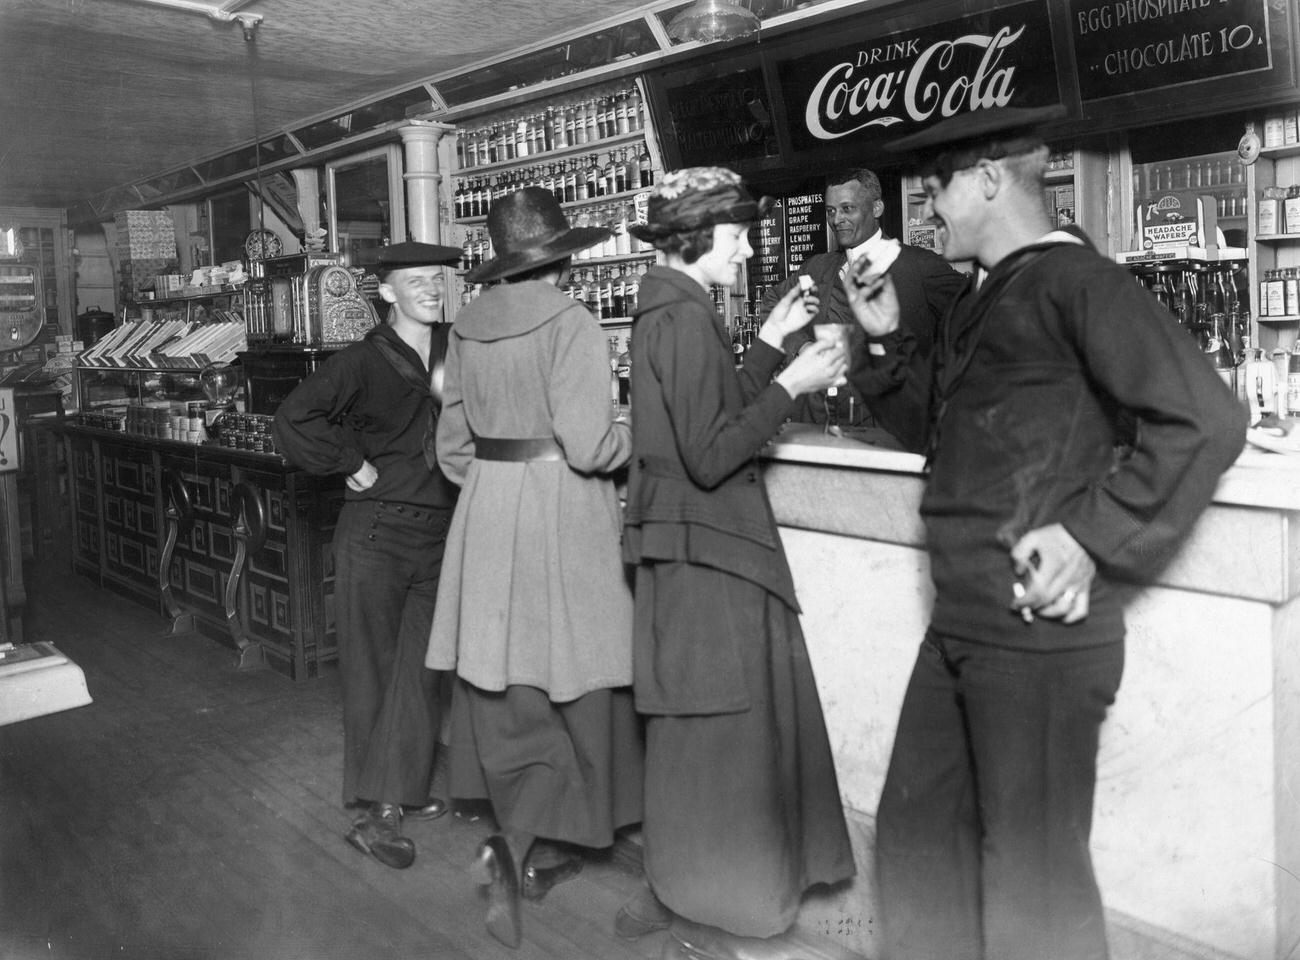 Two sailors and their dates drinking Coca-Cola at a soda fountain, World War I era.